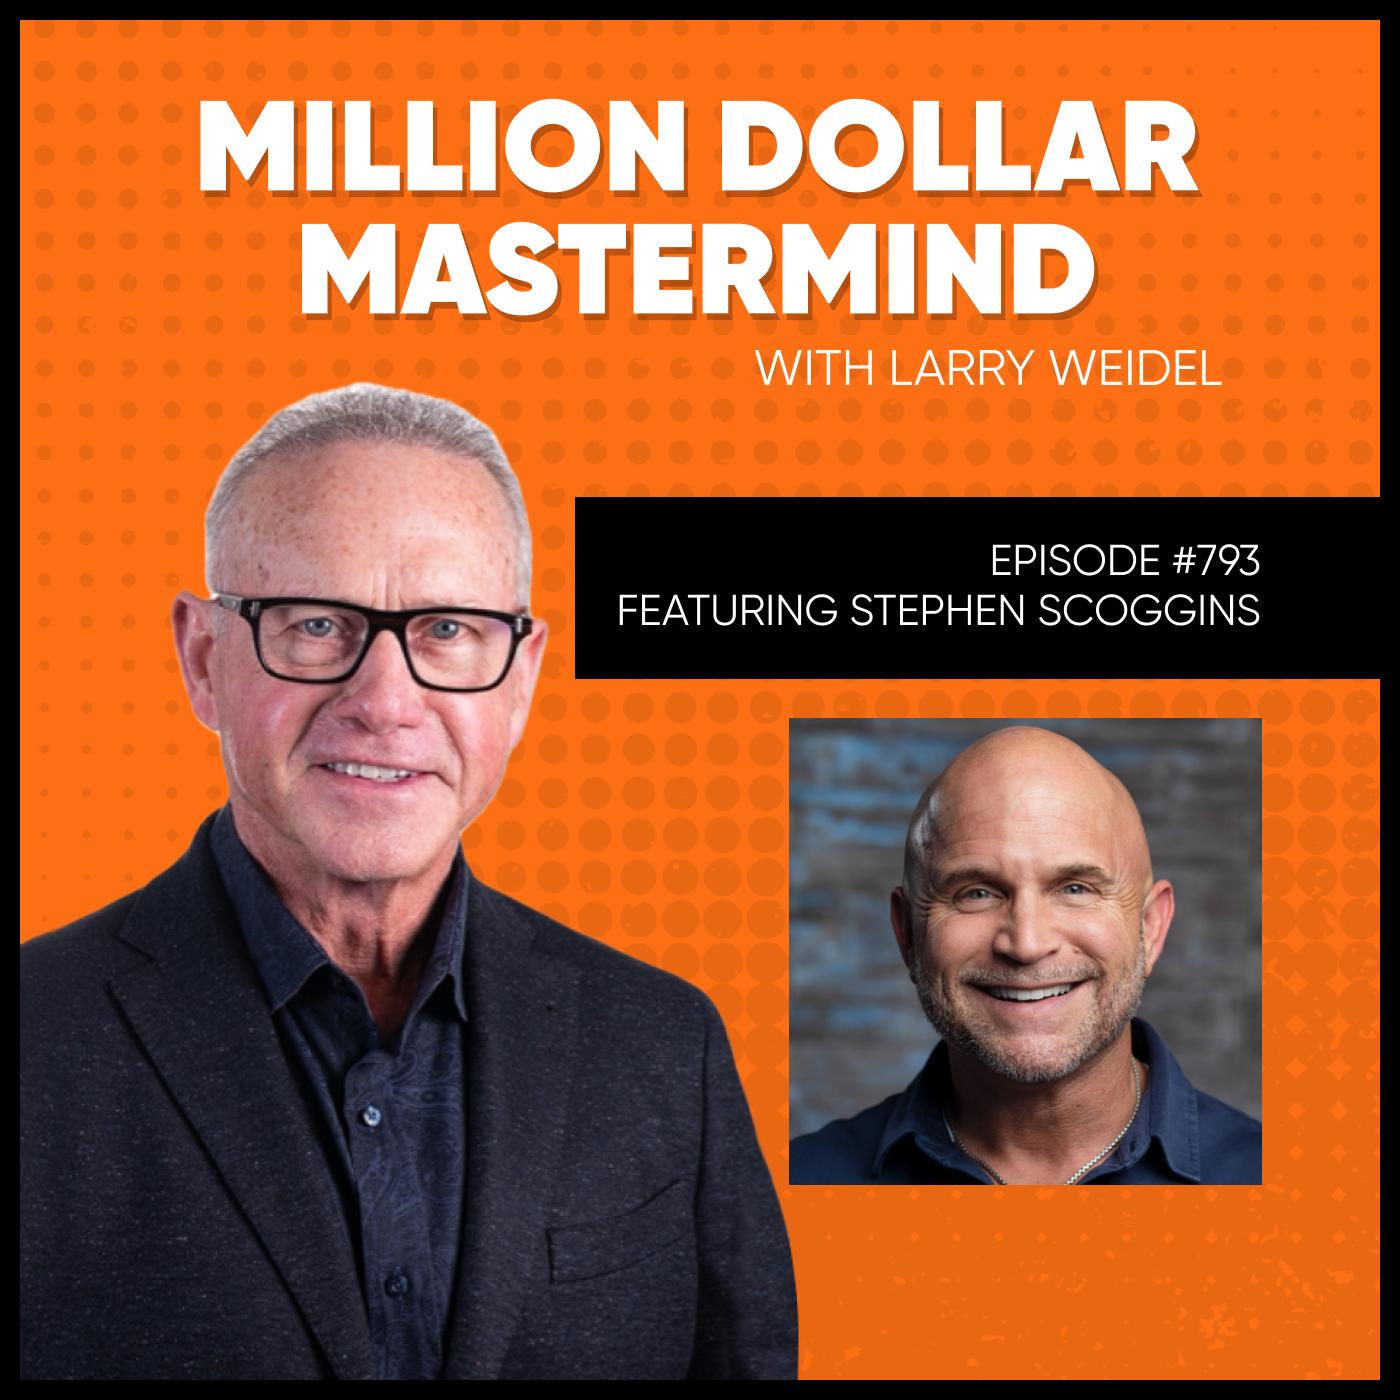 Episode #793 - How To Build A 9-Figure Business Empire with Stephen Scoggins